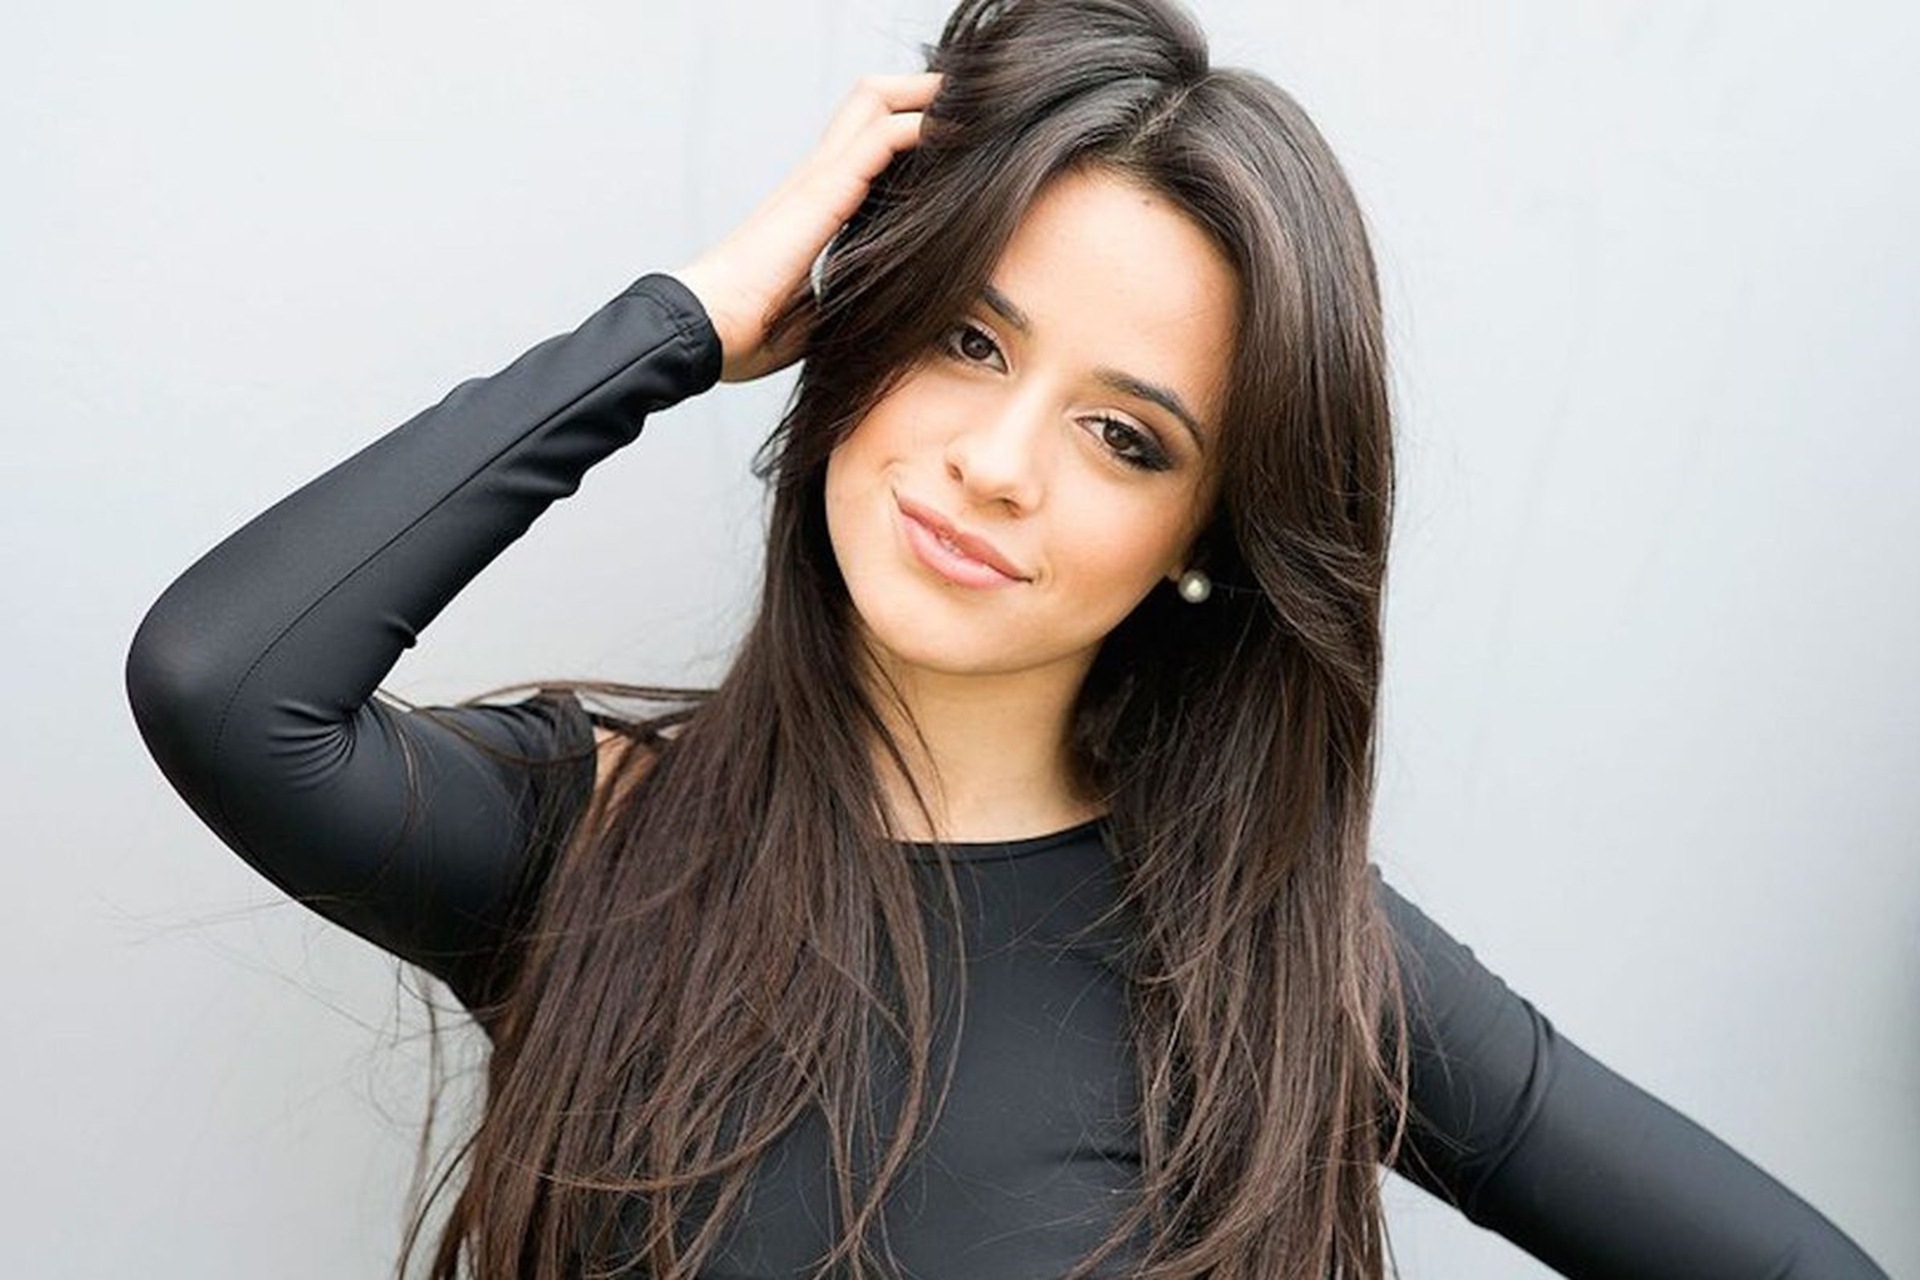 camila cabello 1080P 2k 4k HD wallpapers backgrounds free download   Rare Gallery